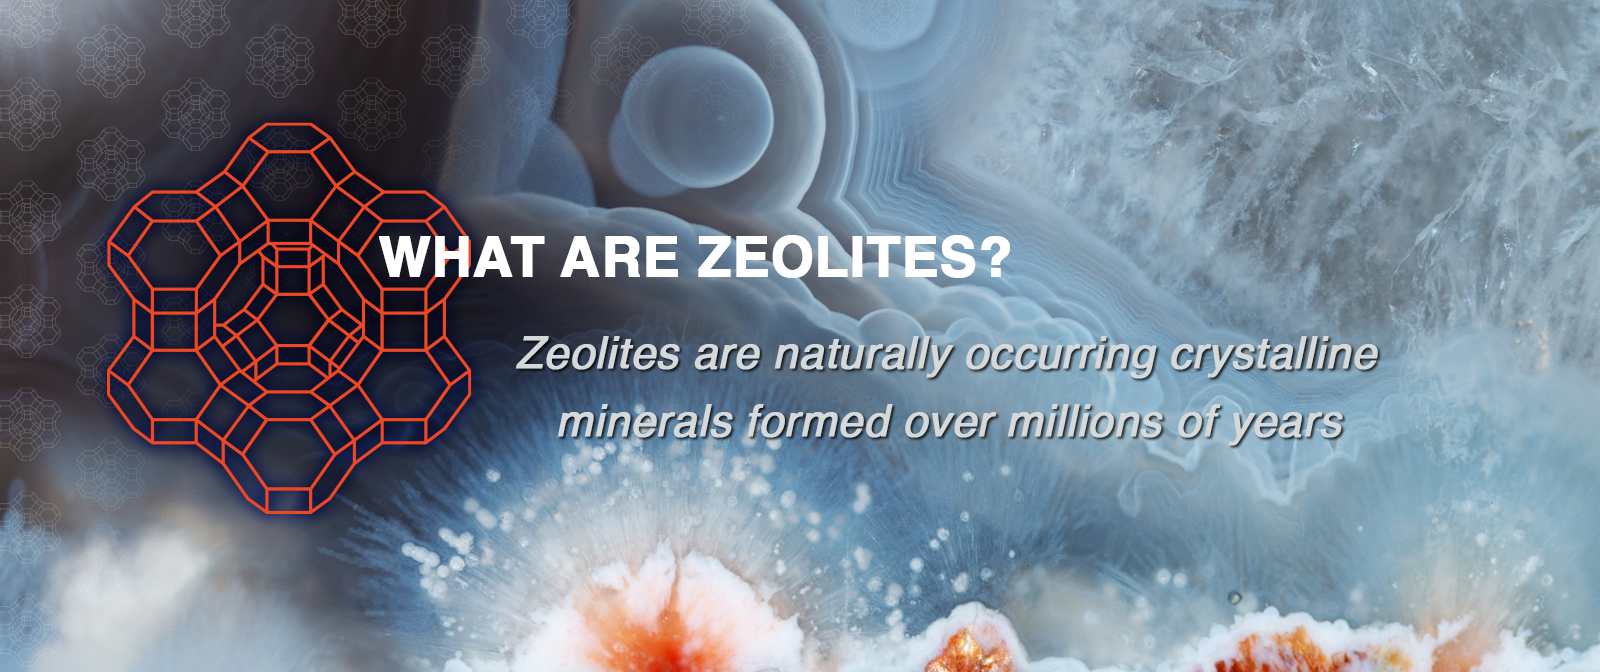 What Are Zeolites? Clinoptilolite is a naturally occurring zeolite.